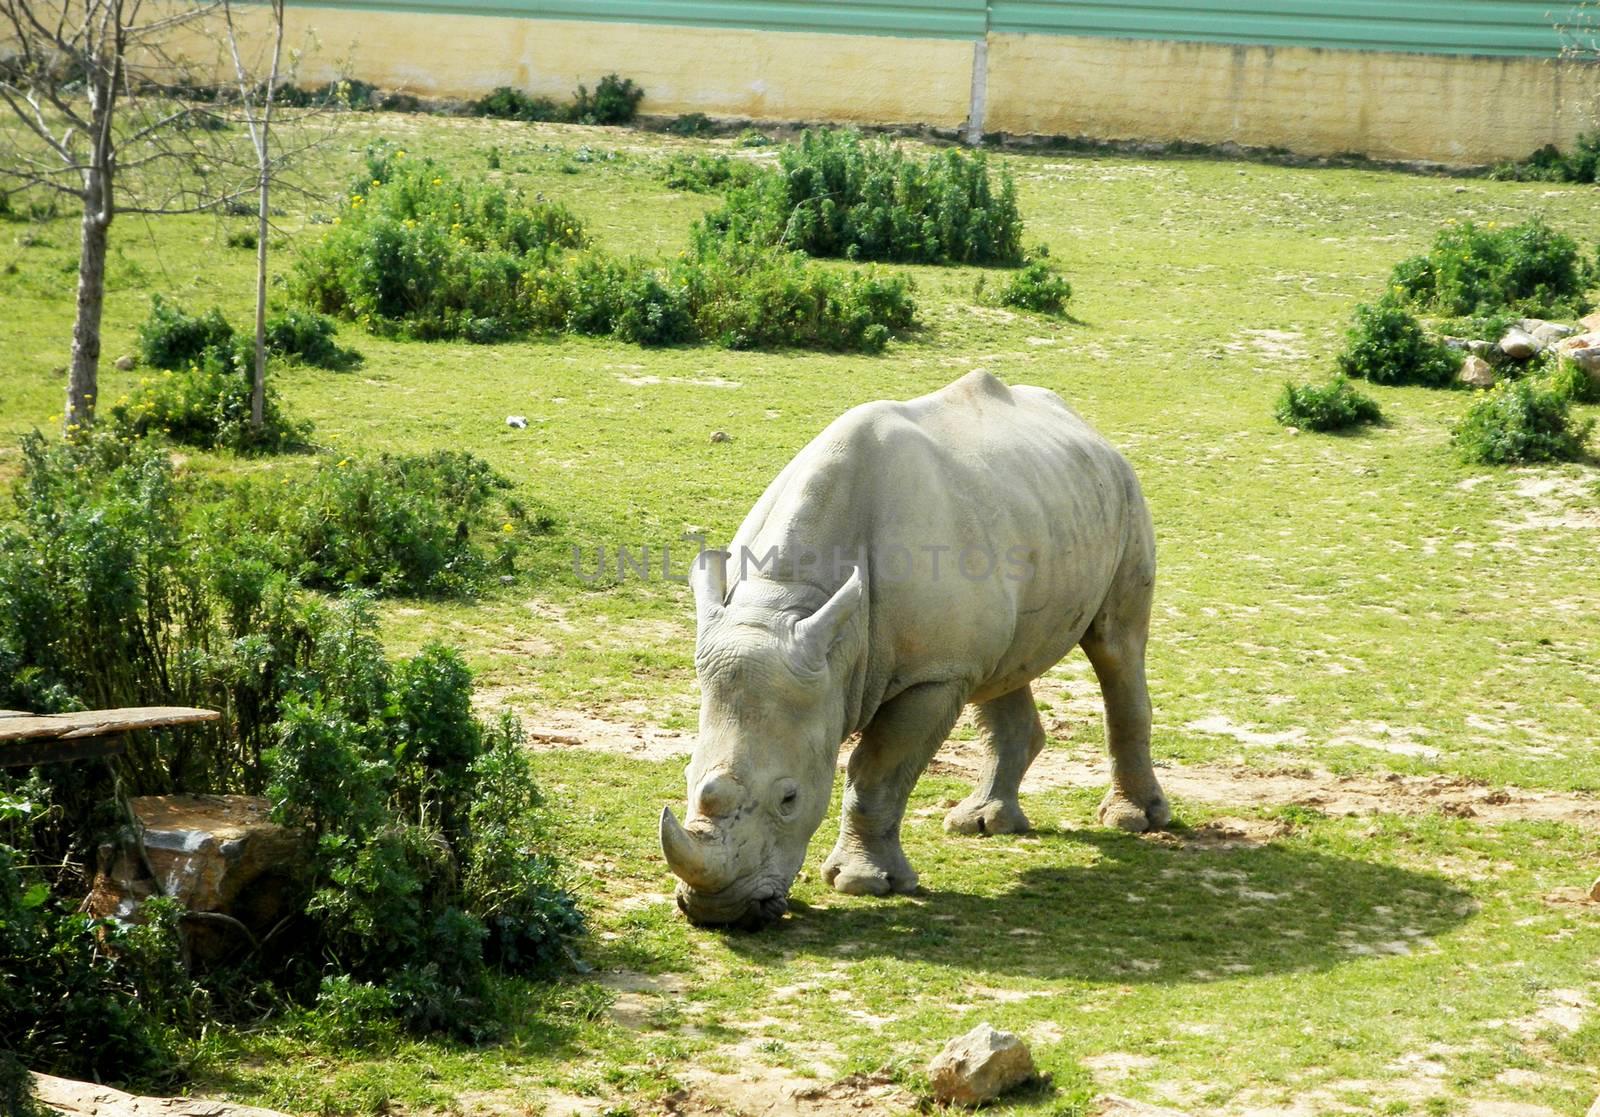 Close up view of a Rhinoceros grazing.

Picture taken on March 13, 2011.